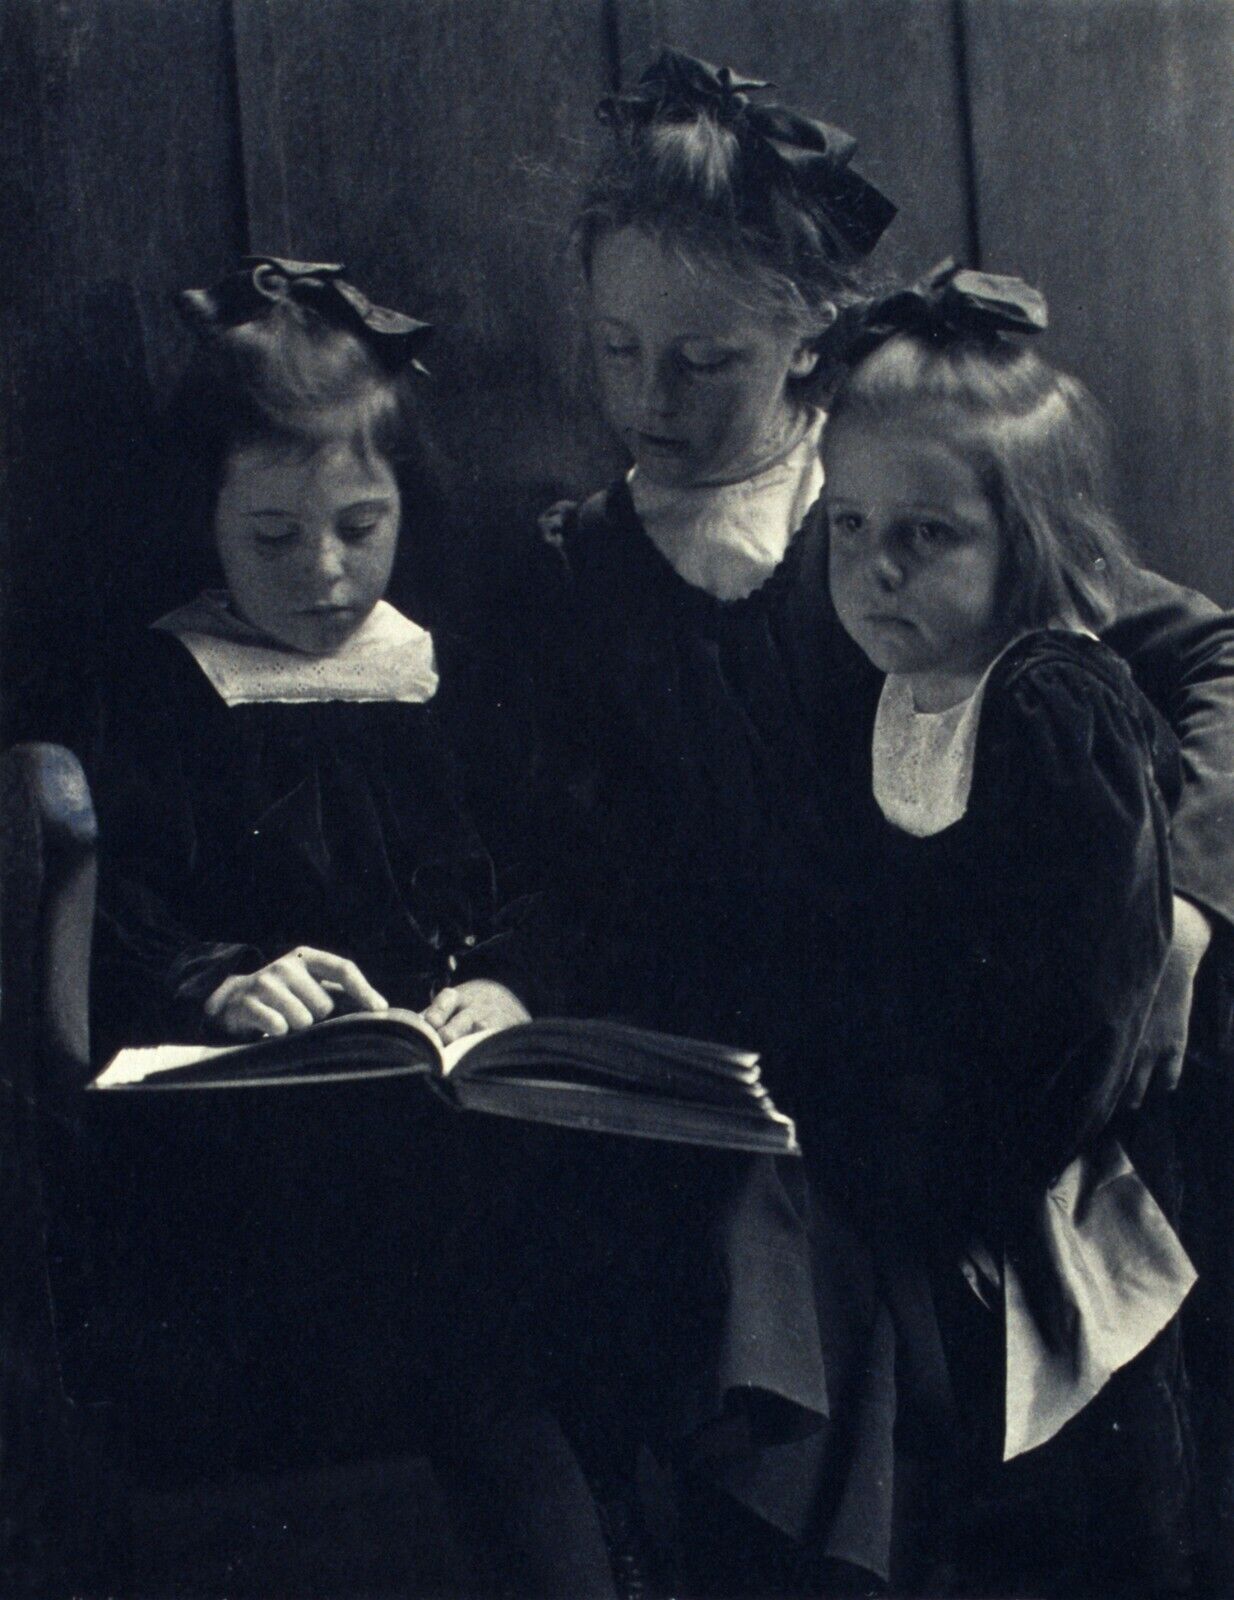 New 5 x 7 Photo of Young Girls Reading a Book - Black & White